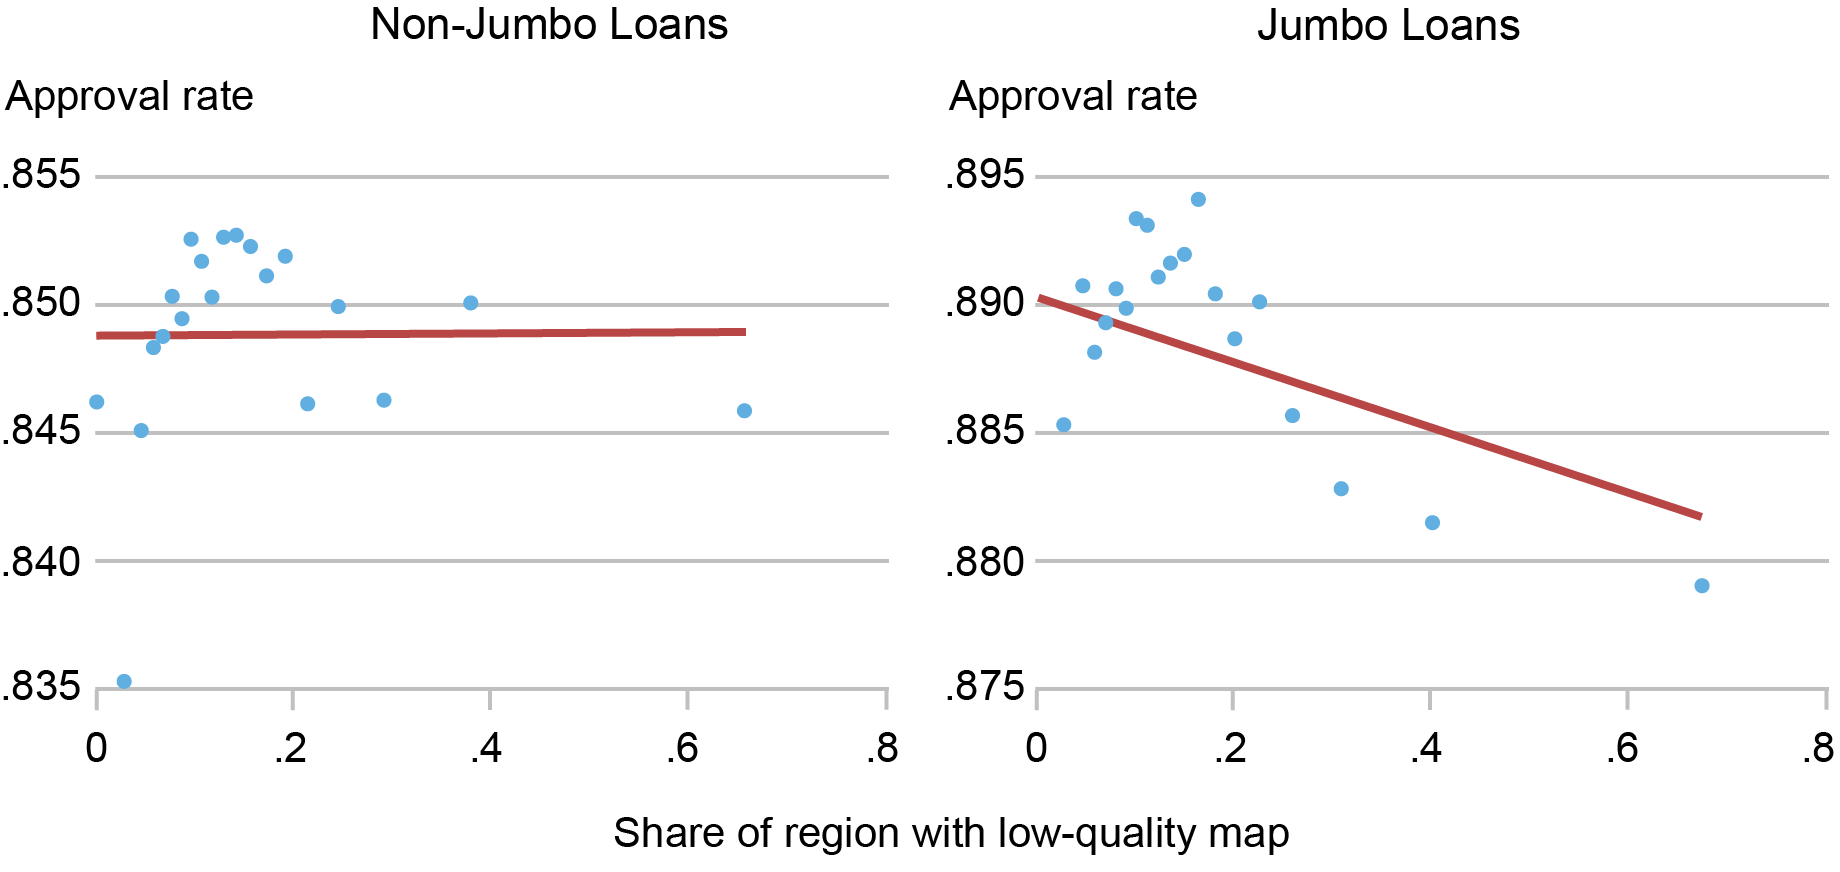 Two-panel Liberty Street Economics binscatter chart showing banks’ approval rates for non-jumbo loans (left panel) and jumbo loans (right panel) in inaccurate flood map areas.